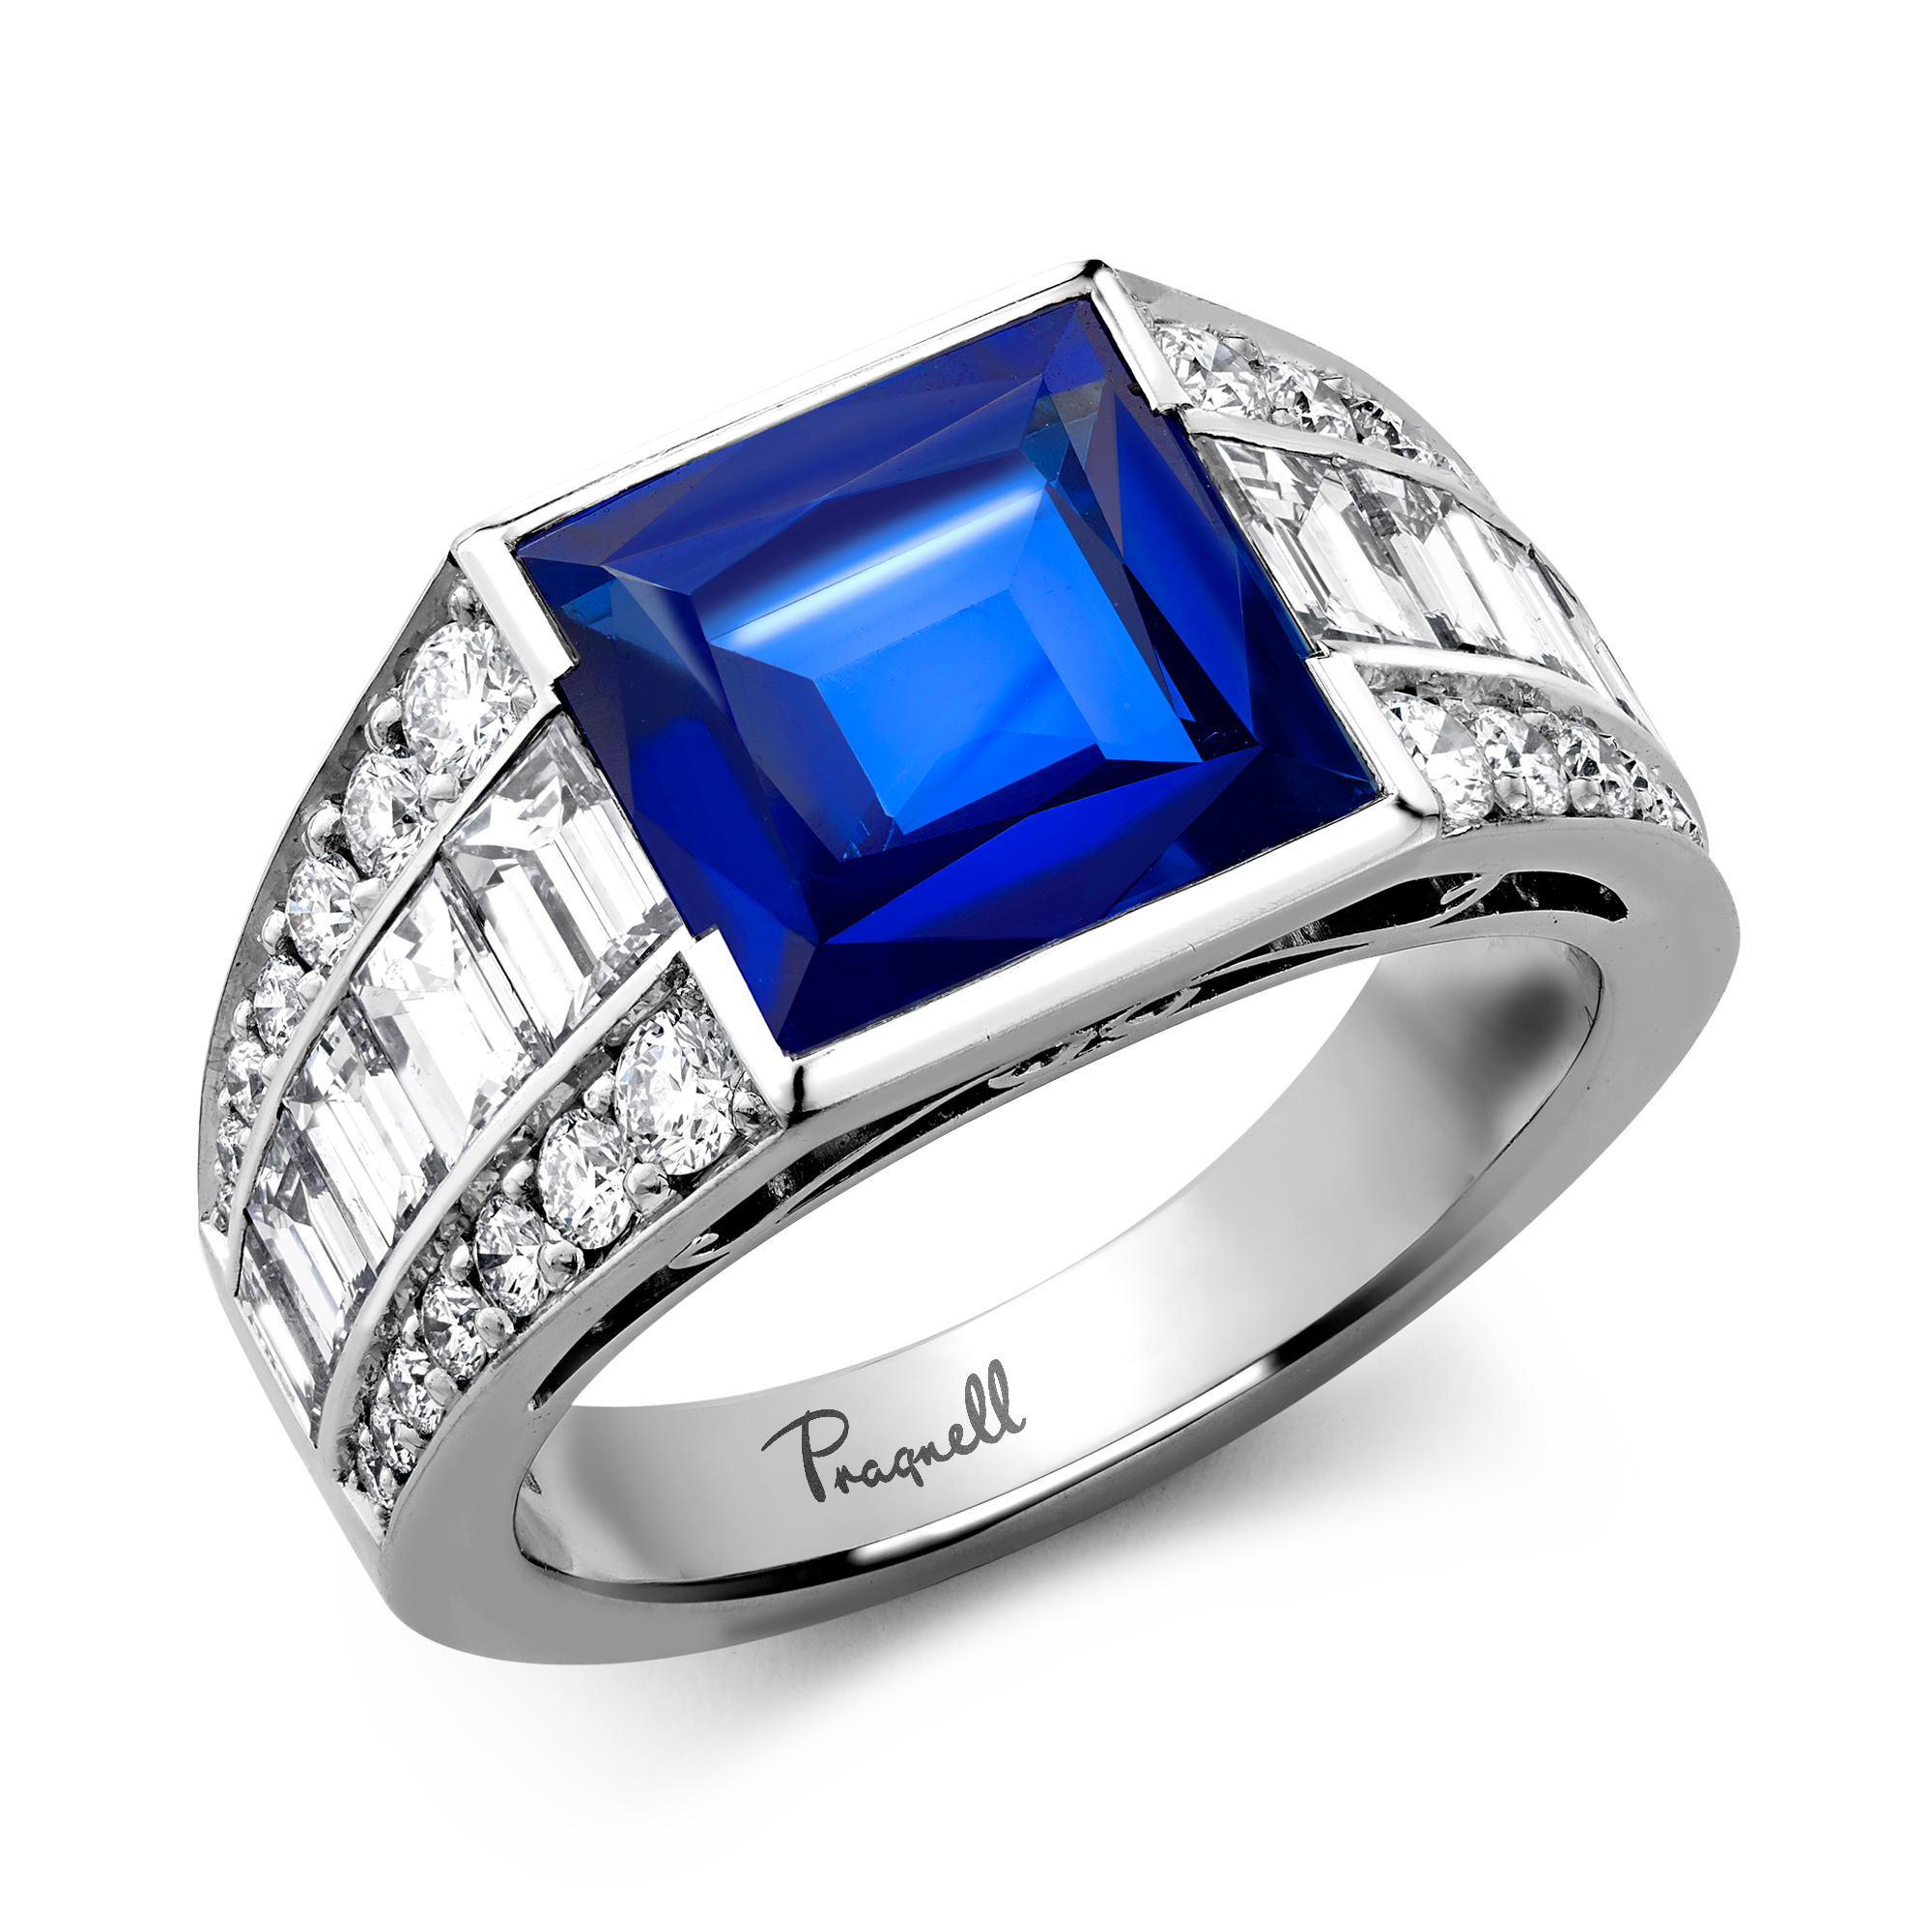 Masterpiece 4.21ct Kashmir Sapphire and Diamond Ring Square Cut, Rubover Set_1